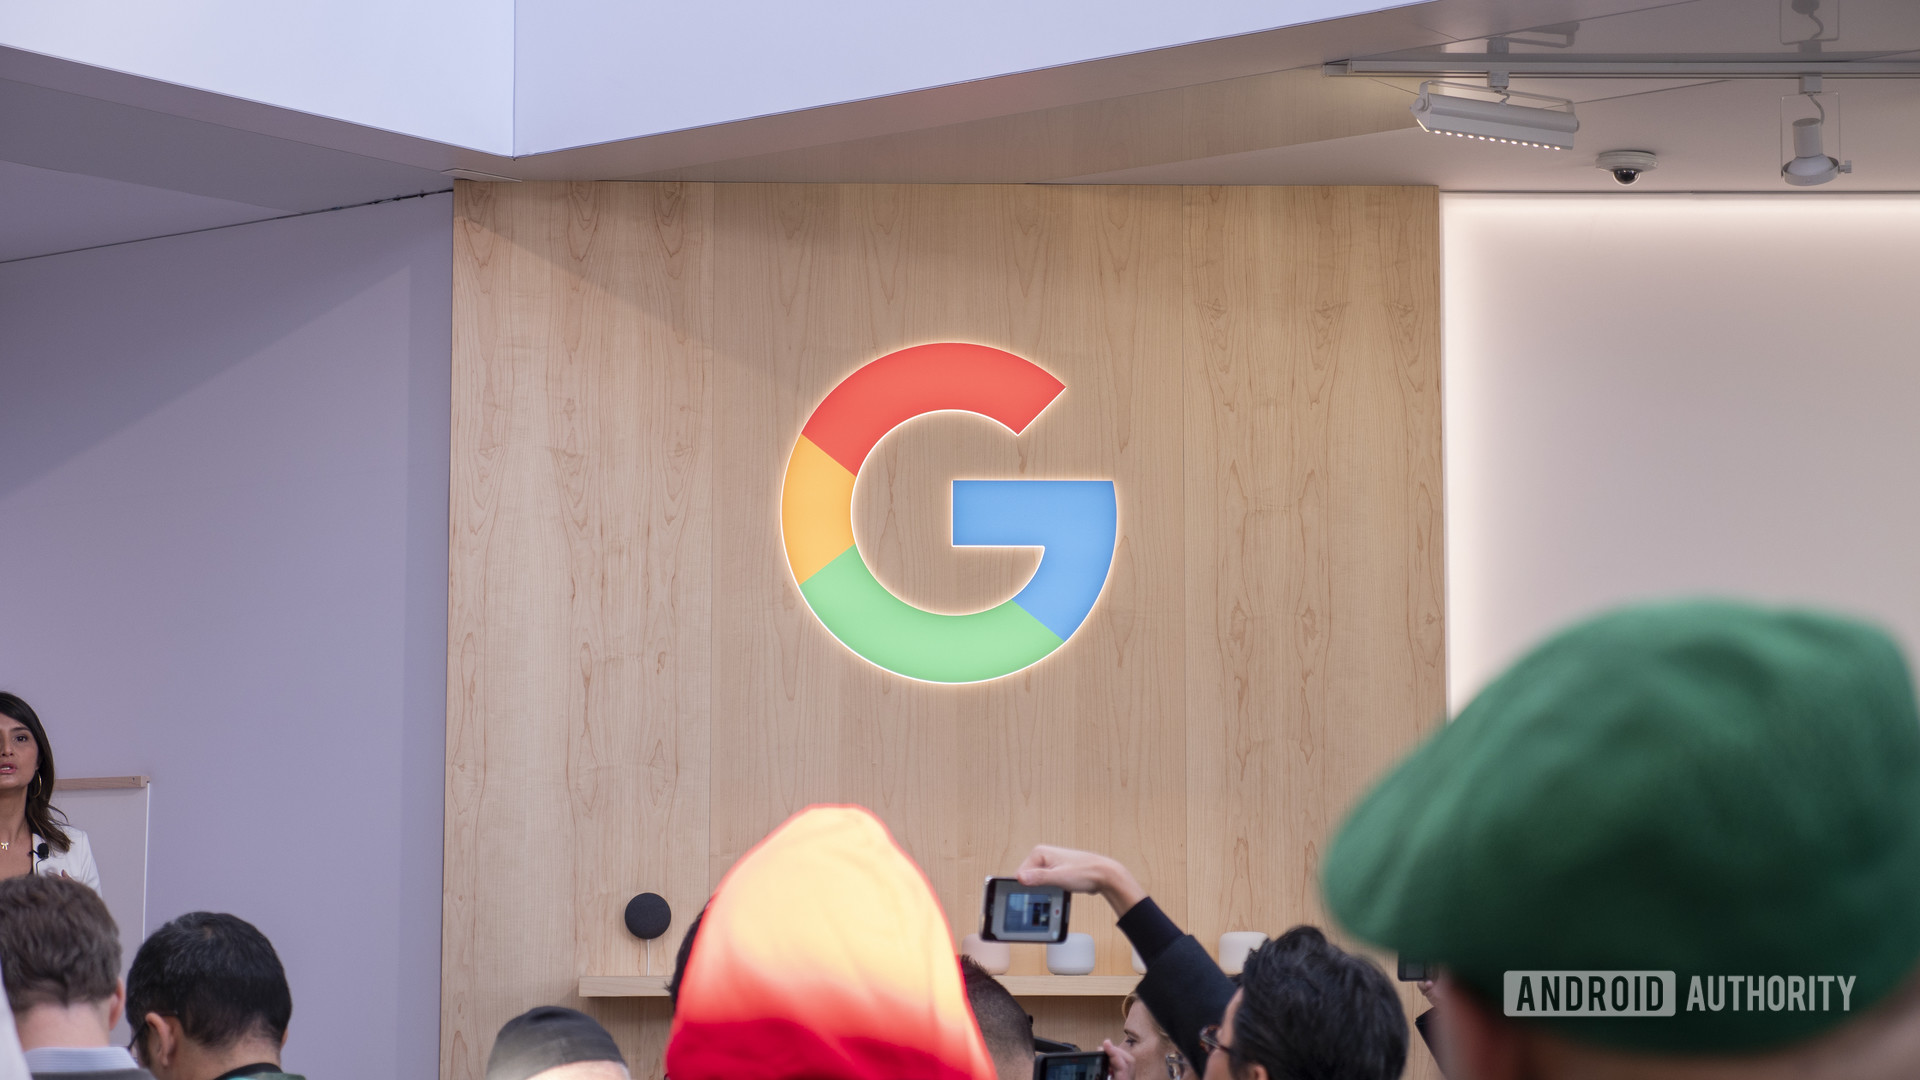 A Google Logo stands out on a wall during CES 2020.